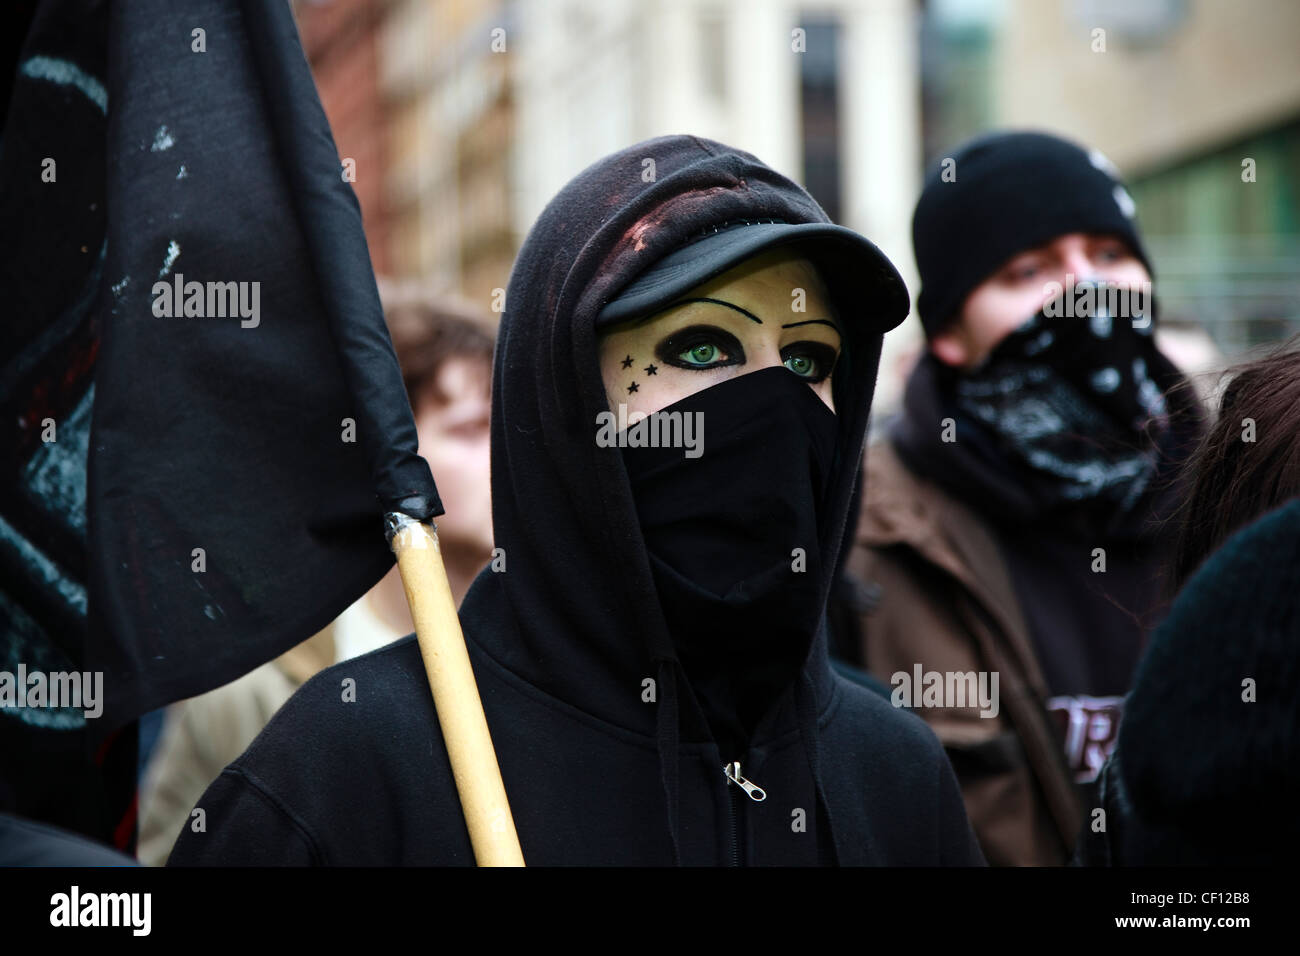 Demonstrator with a black flag and face covered up, at a street demonstration Glasgow, against racism,Scotland, UK Stock Photo